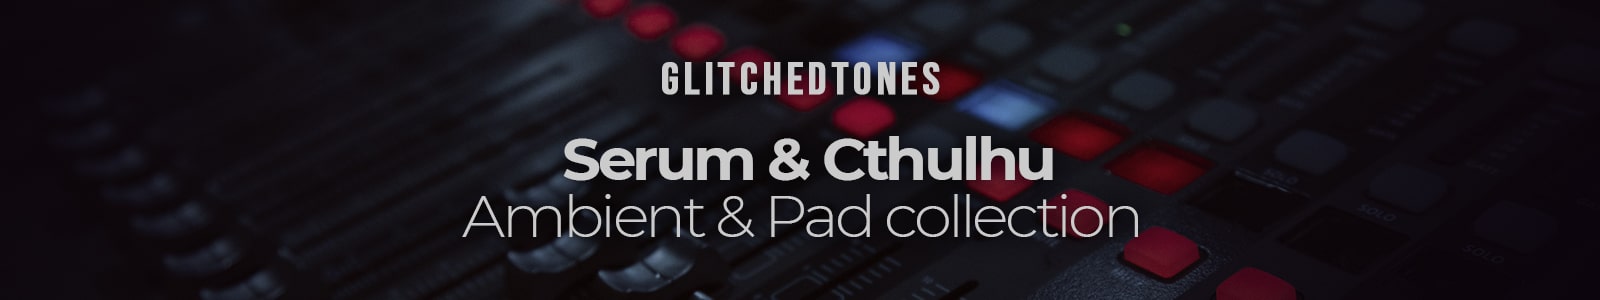 Serum & Cthulhu Ambient & Pad Collection by Glitchedtones